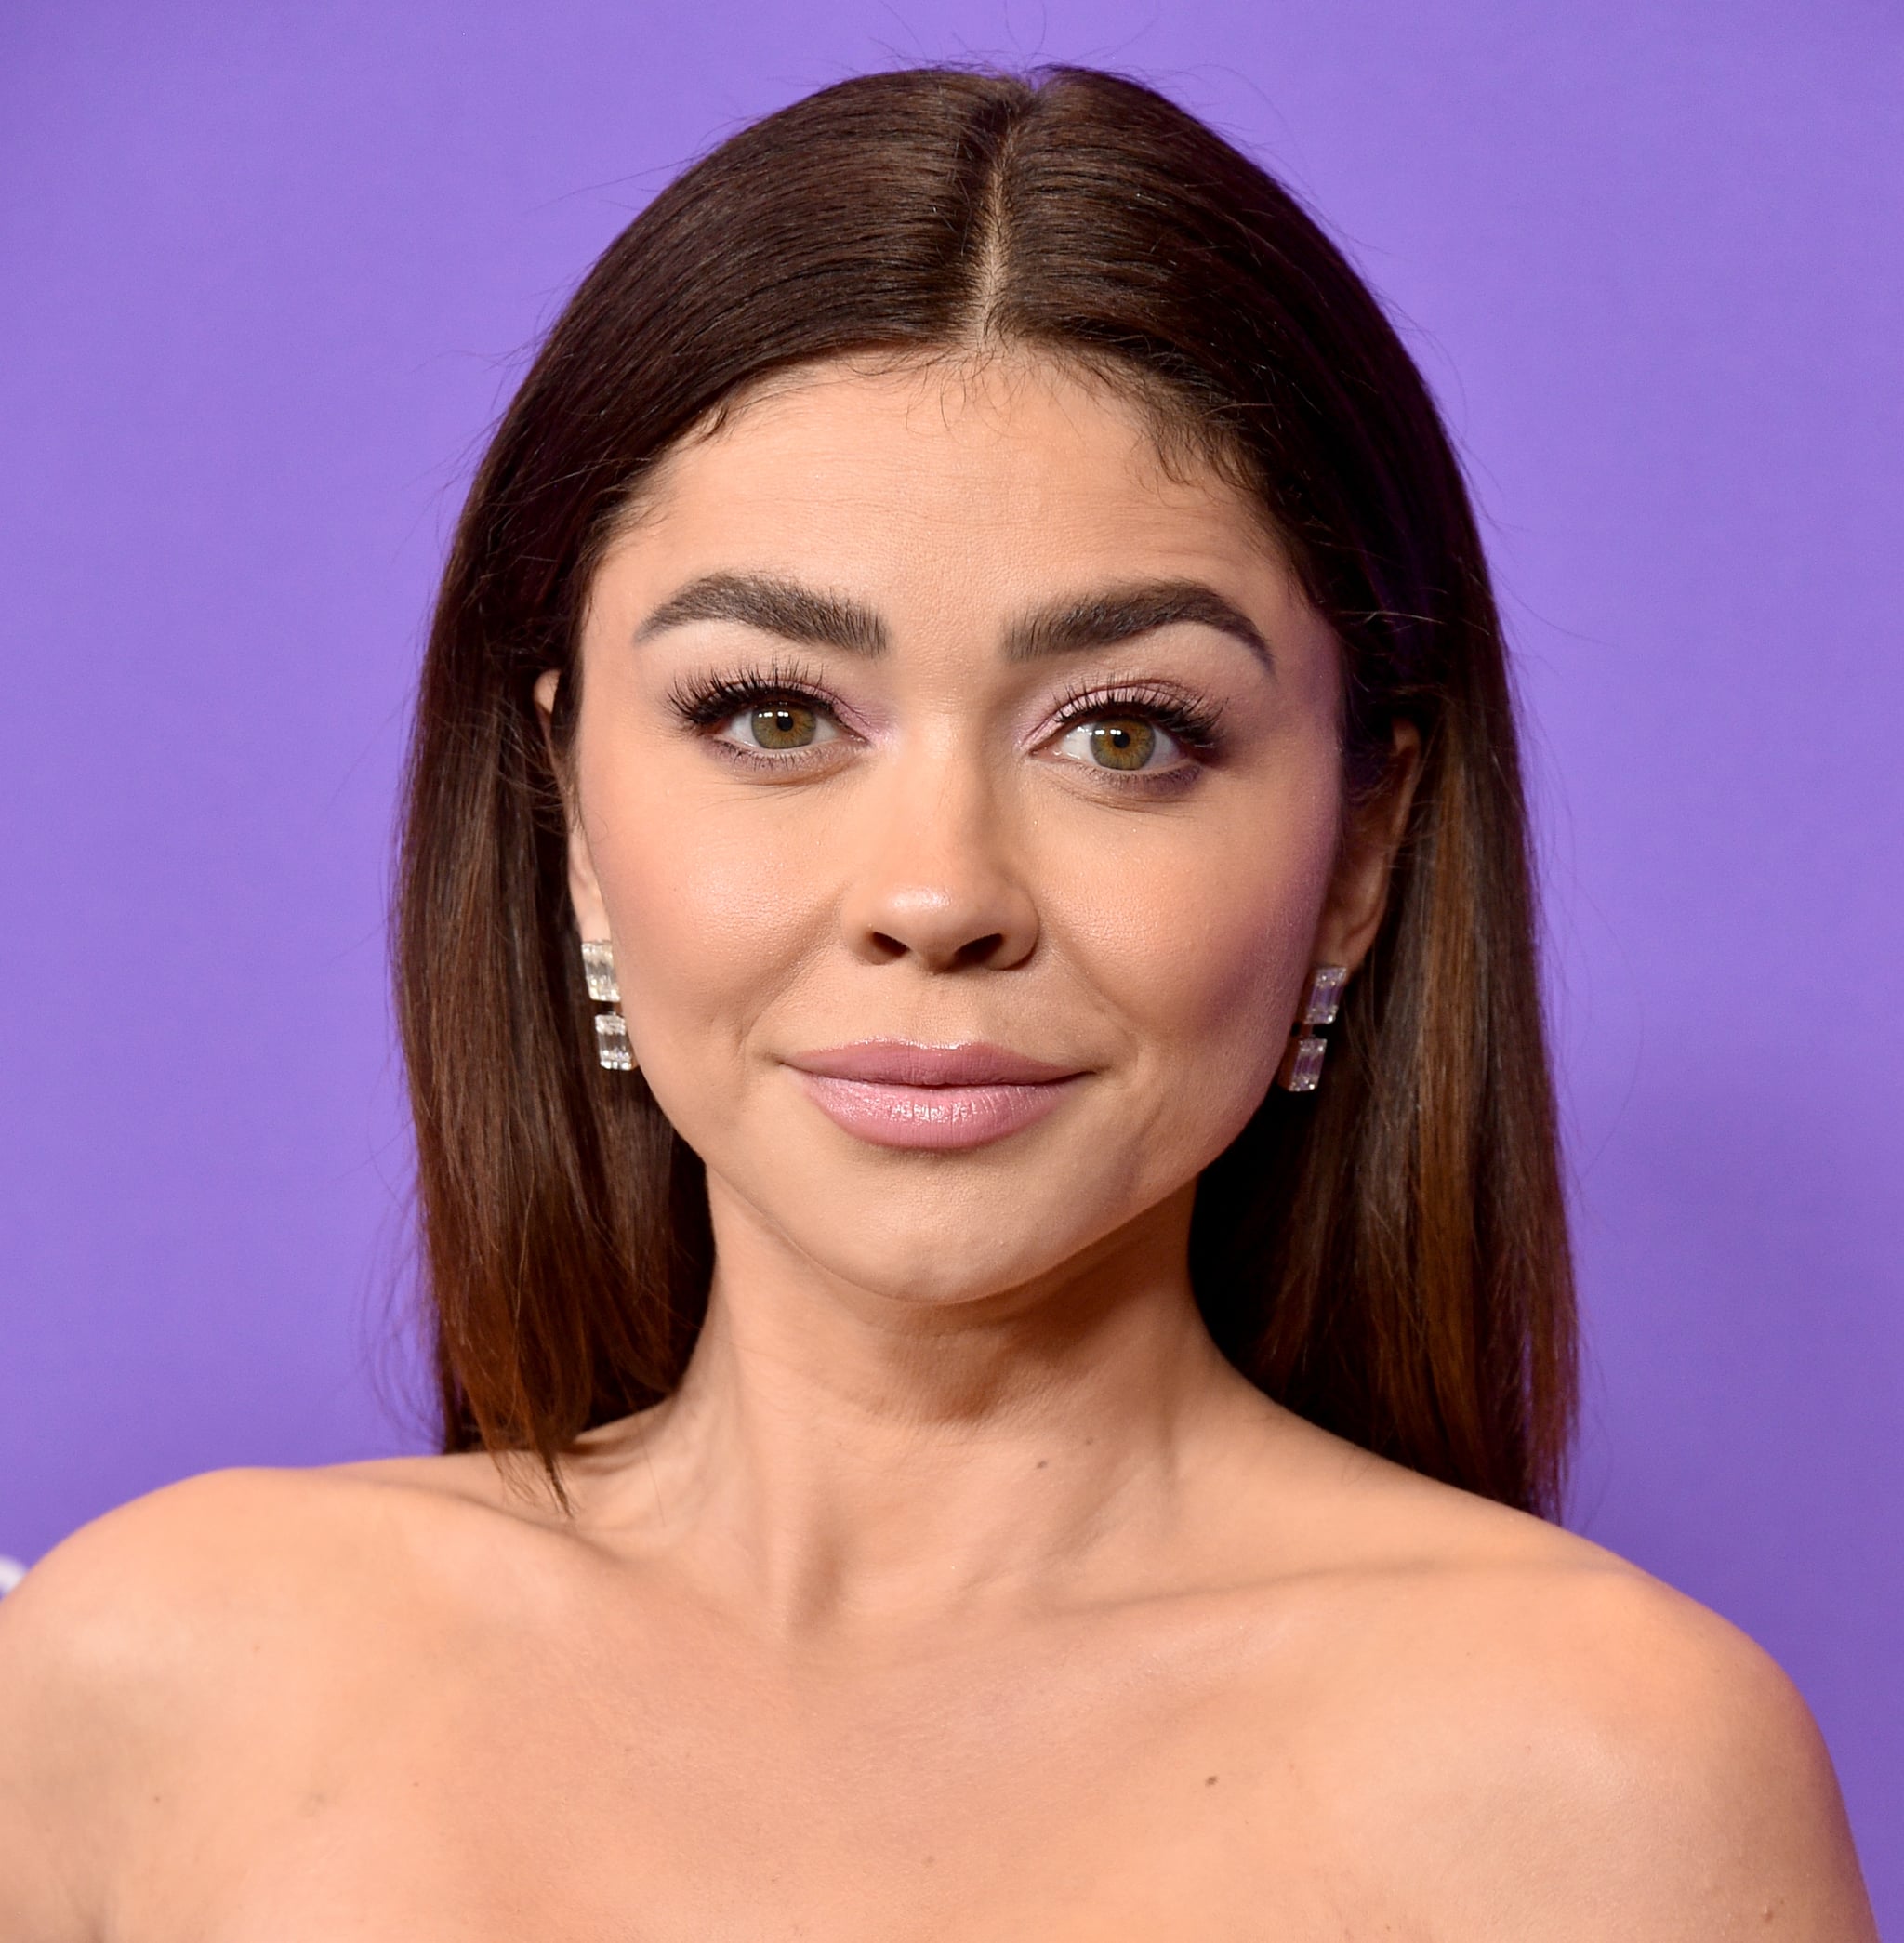 LOS ANGELES, CALIFORNIA - APRIL 22: Sarah Hyland attends The Los Angeles LGBT Centre Gala at Fairmont Century Plaza on April 22, 2023 in Los Angeles, California. (Photo by Gregg DeGuire/WireImage)